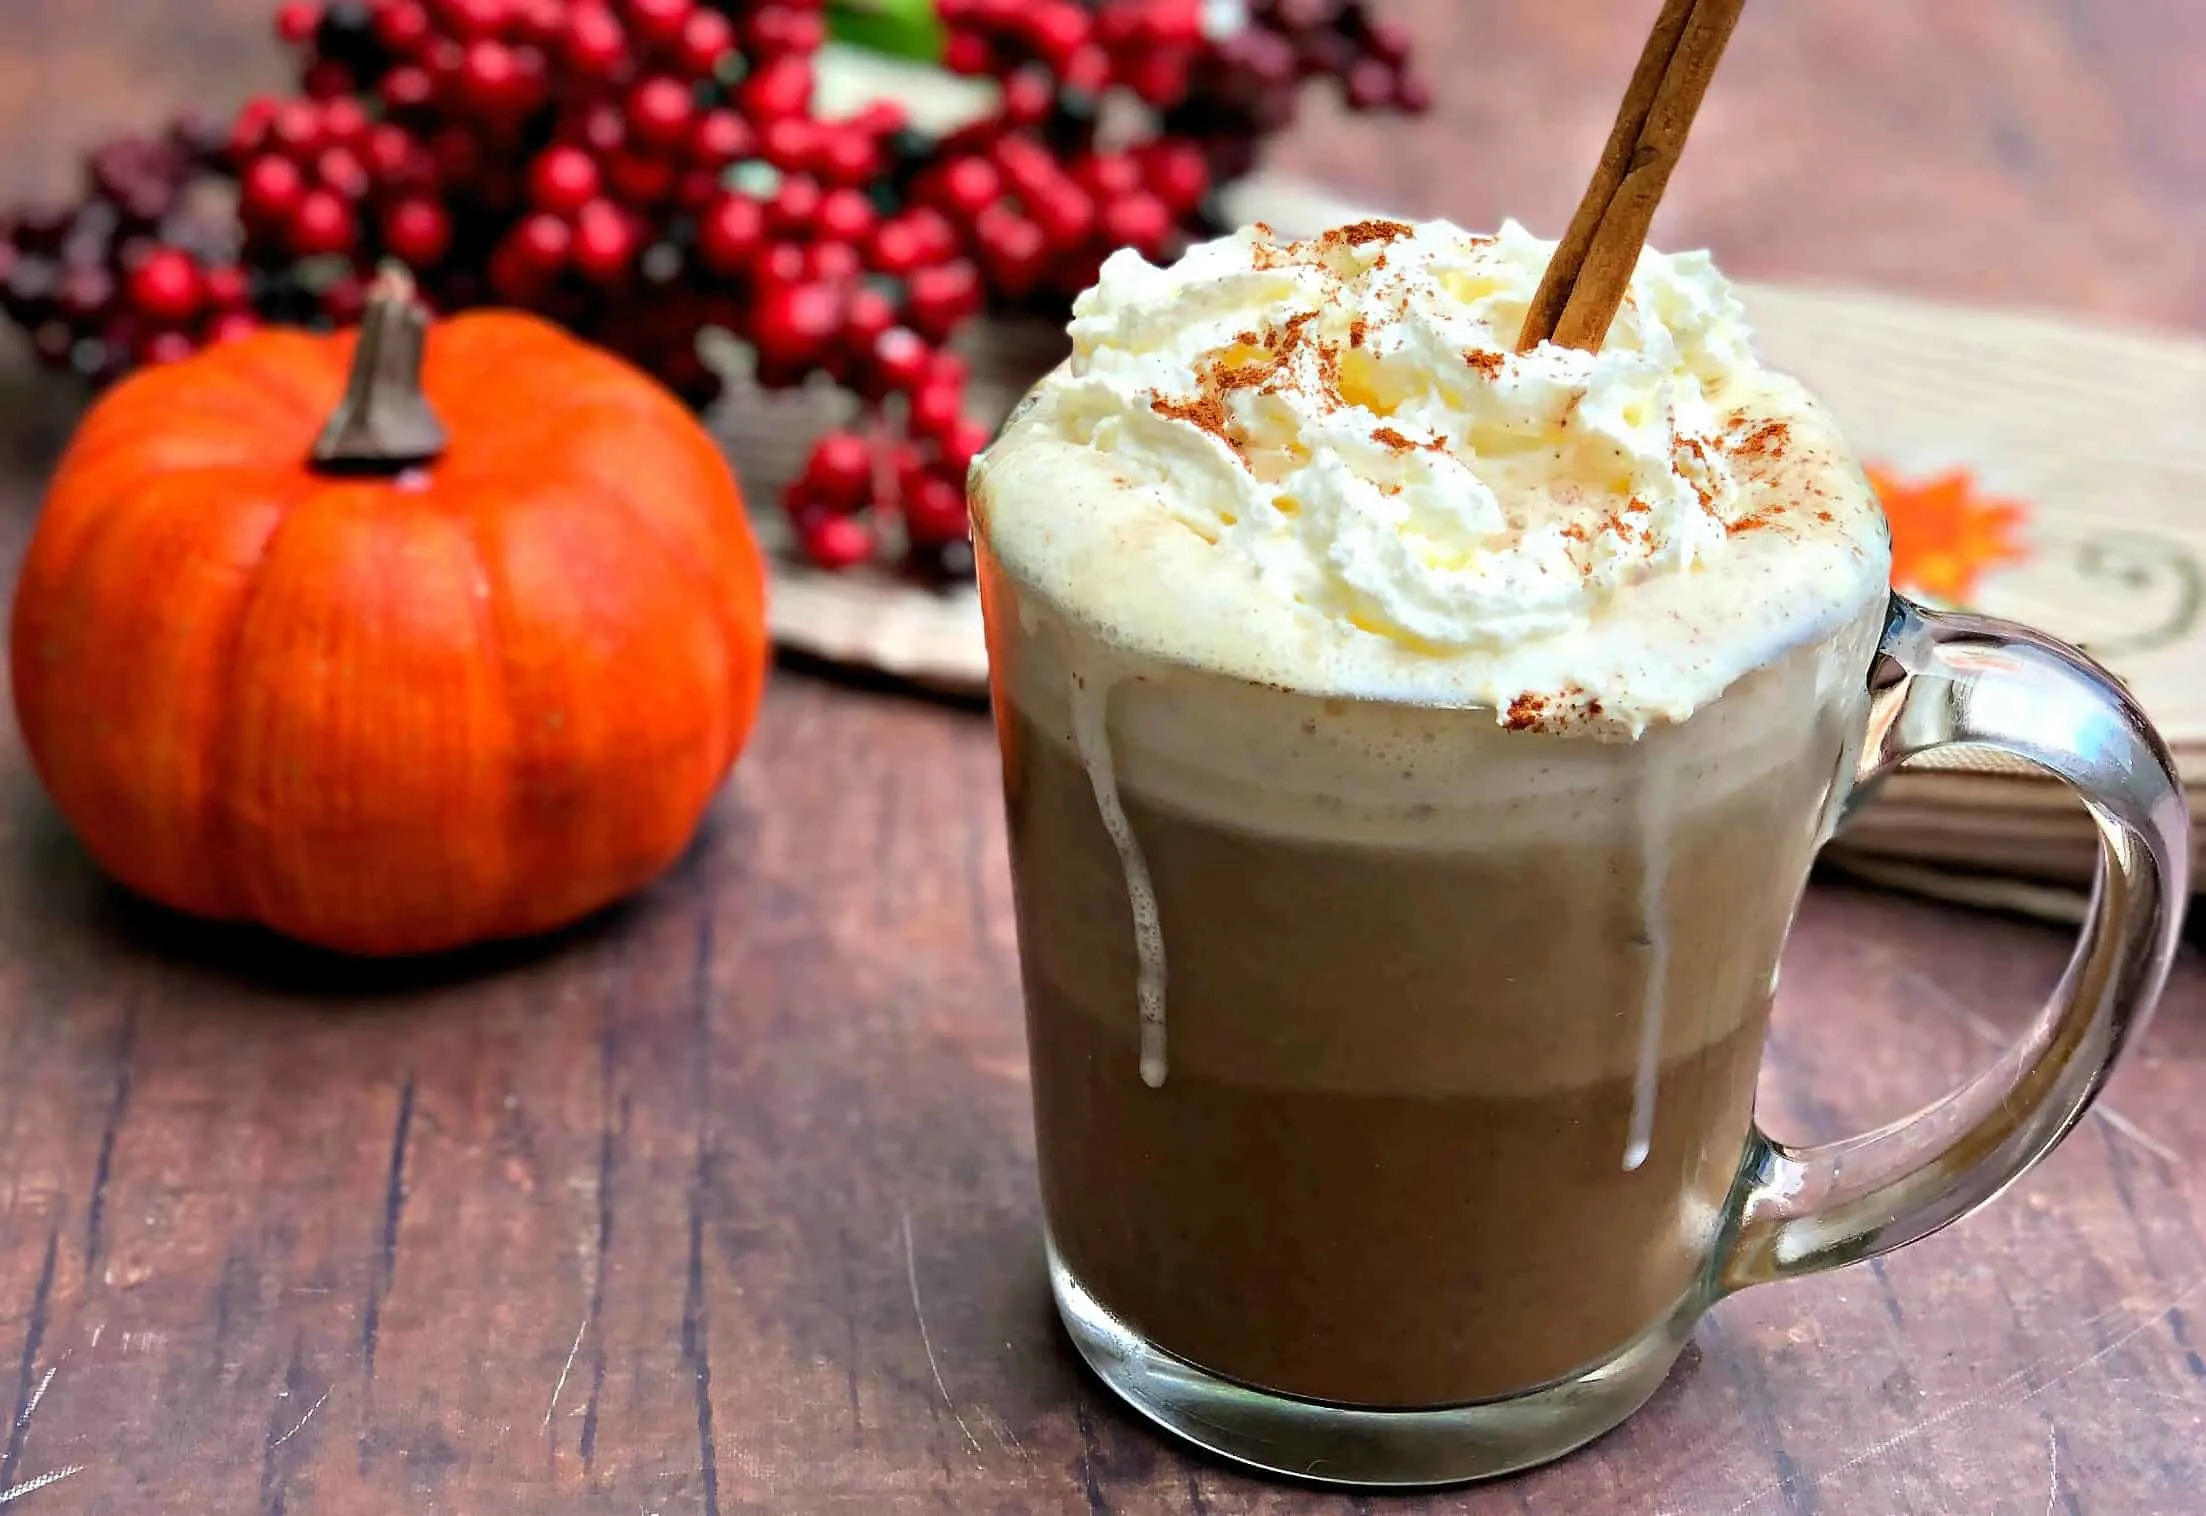 keto pumpkin spiced latte in a glass mug with whipped cream